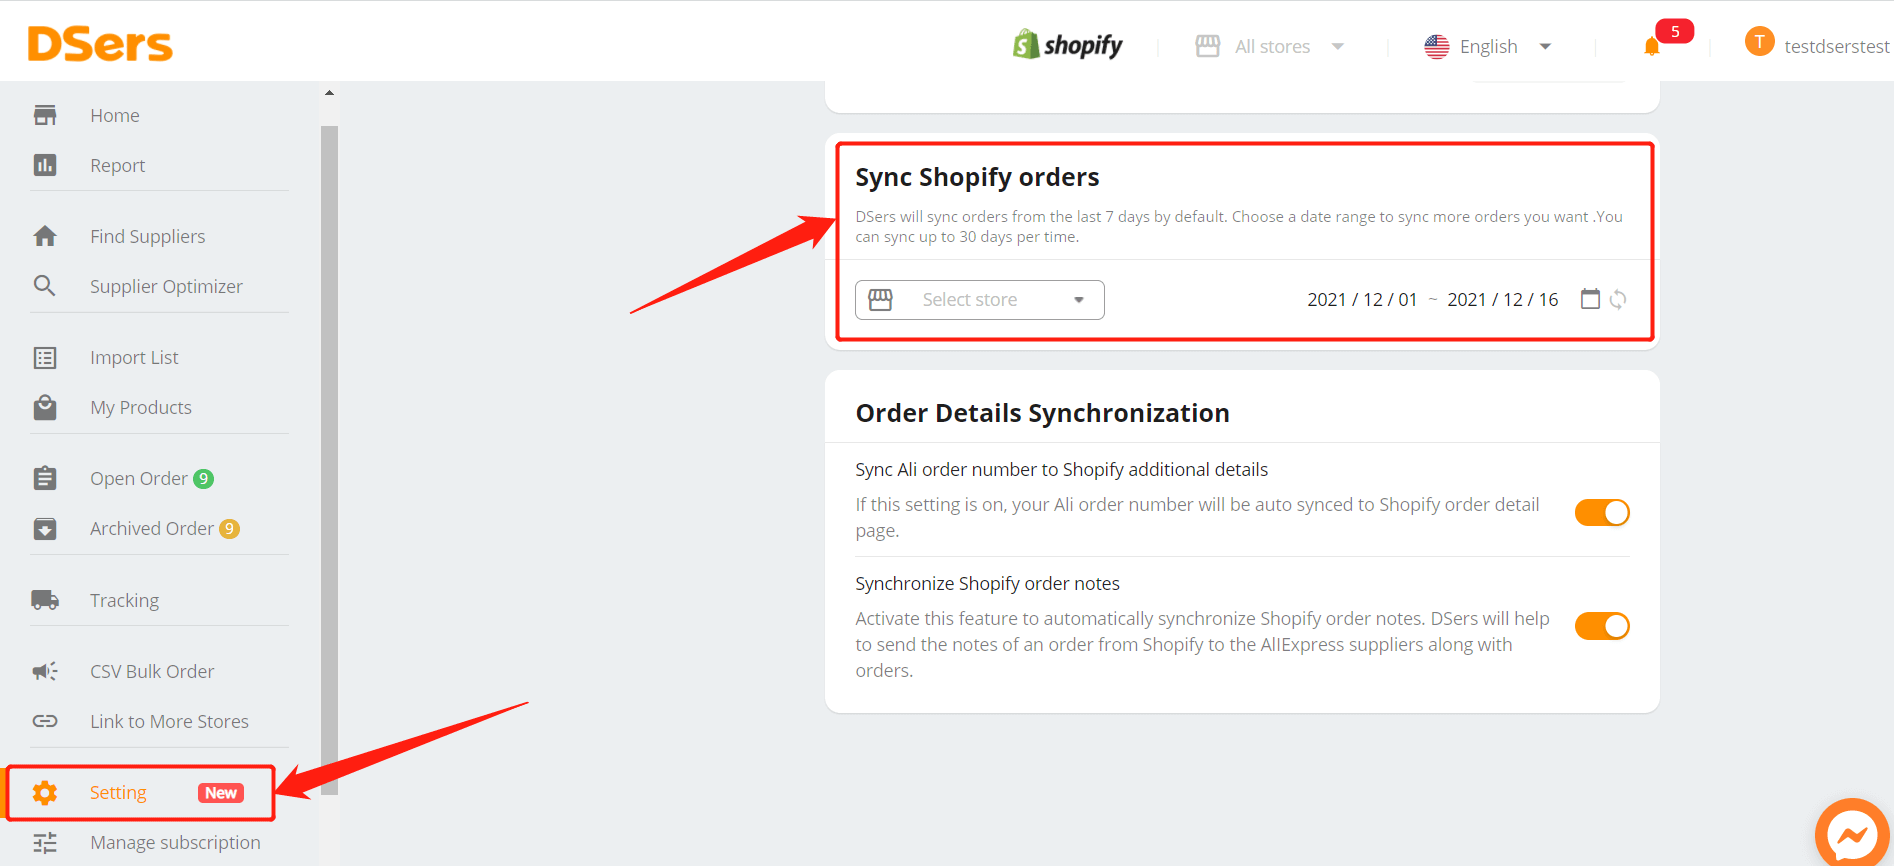 Cancel fulfillment of an order on your store - Setting - Synchronization - Shopify DSers